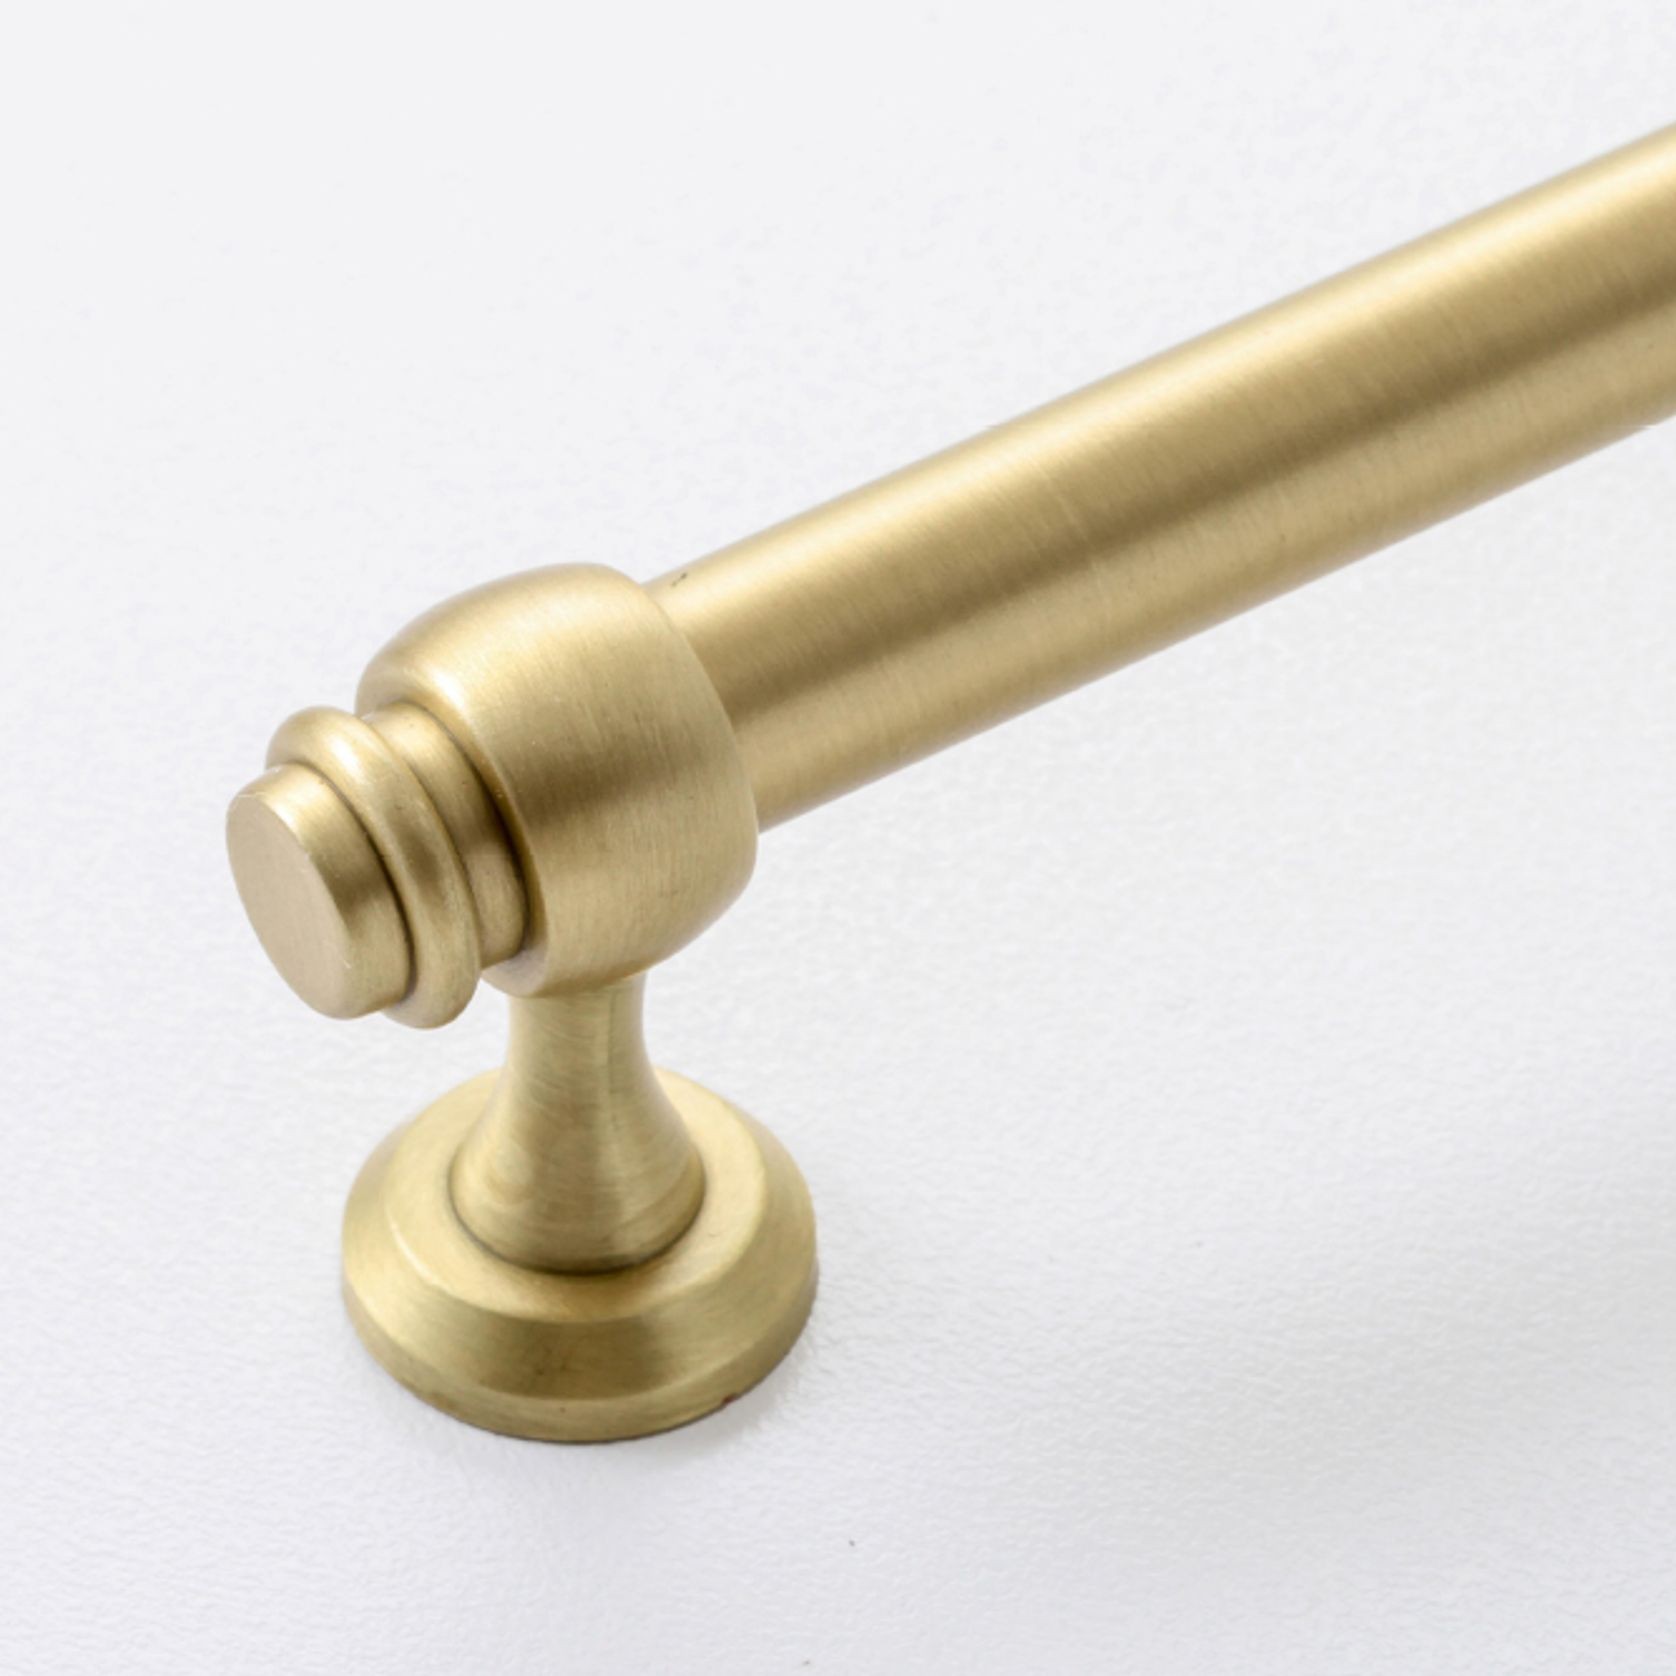 Mayfair Collection | Handle gallery detail image